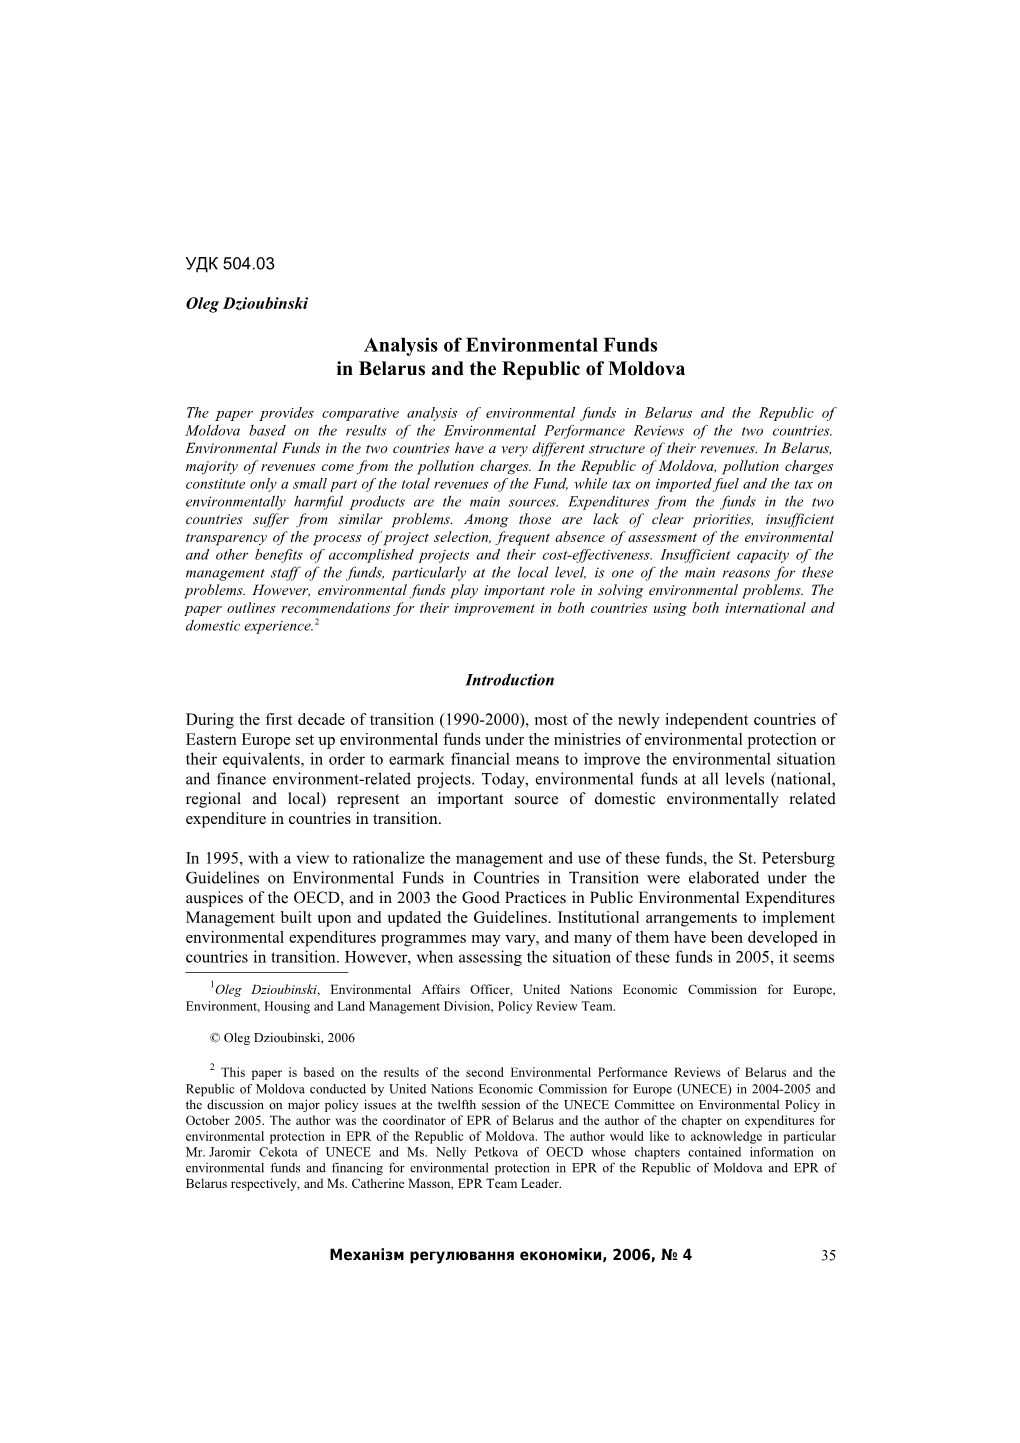 Analysis of Economic Instruments for Environmental Protection in Belarus and the Republic